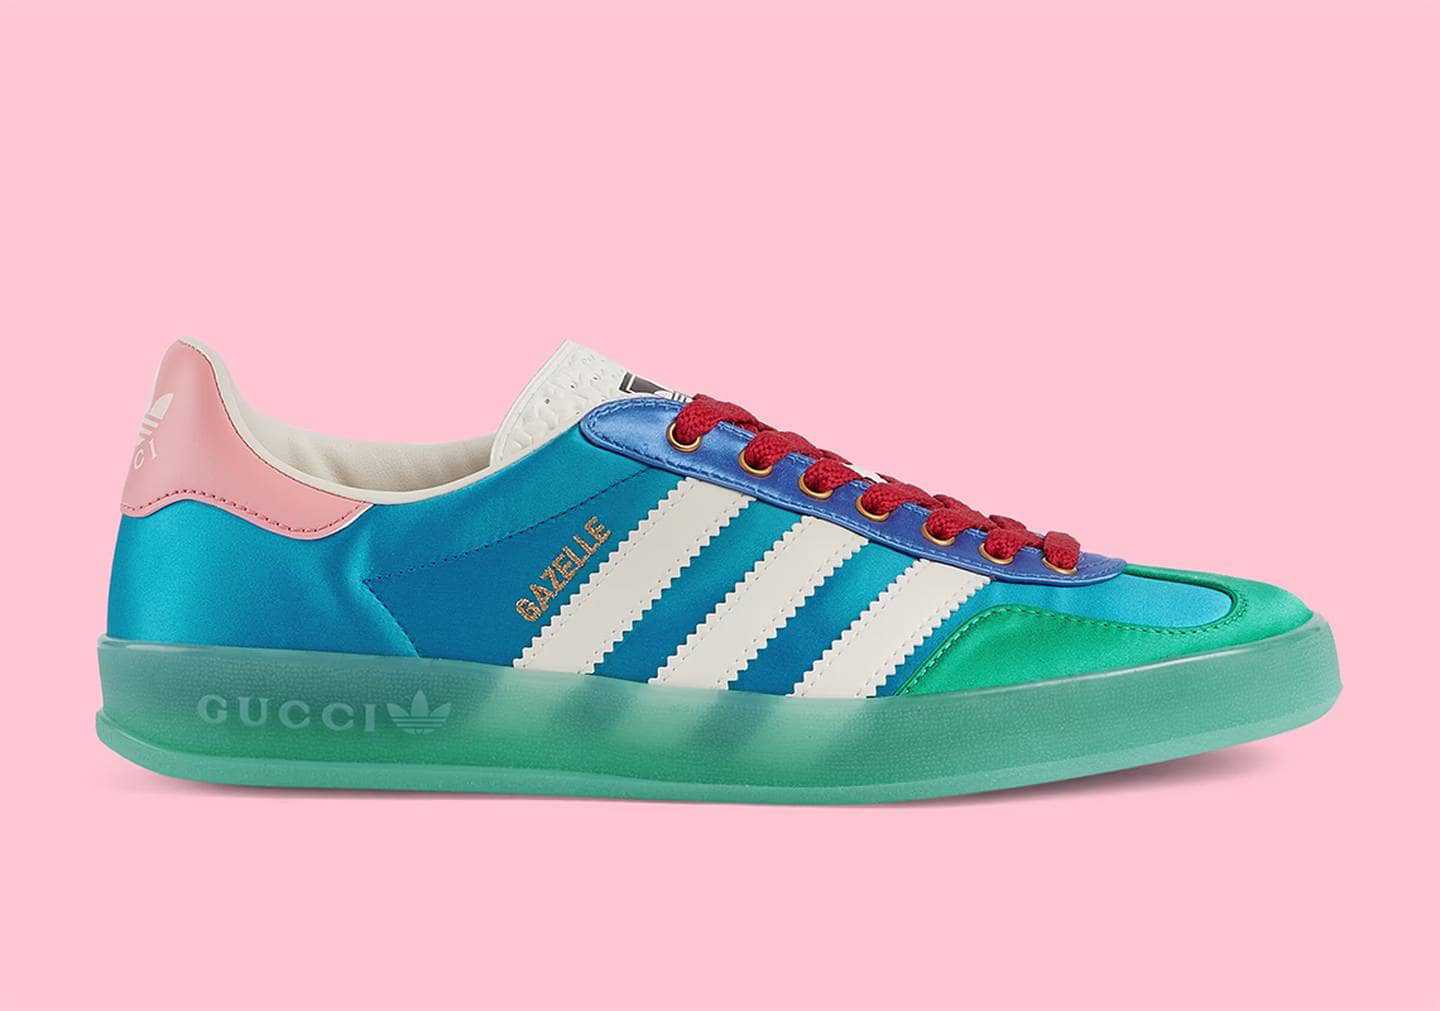 Adidas x Gucci: the best pieces from the new collection that launches in June